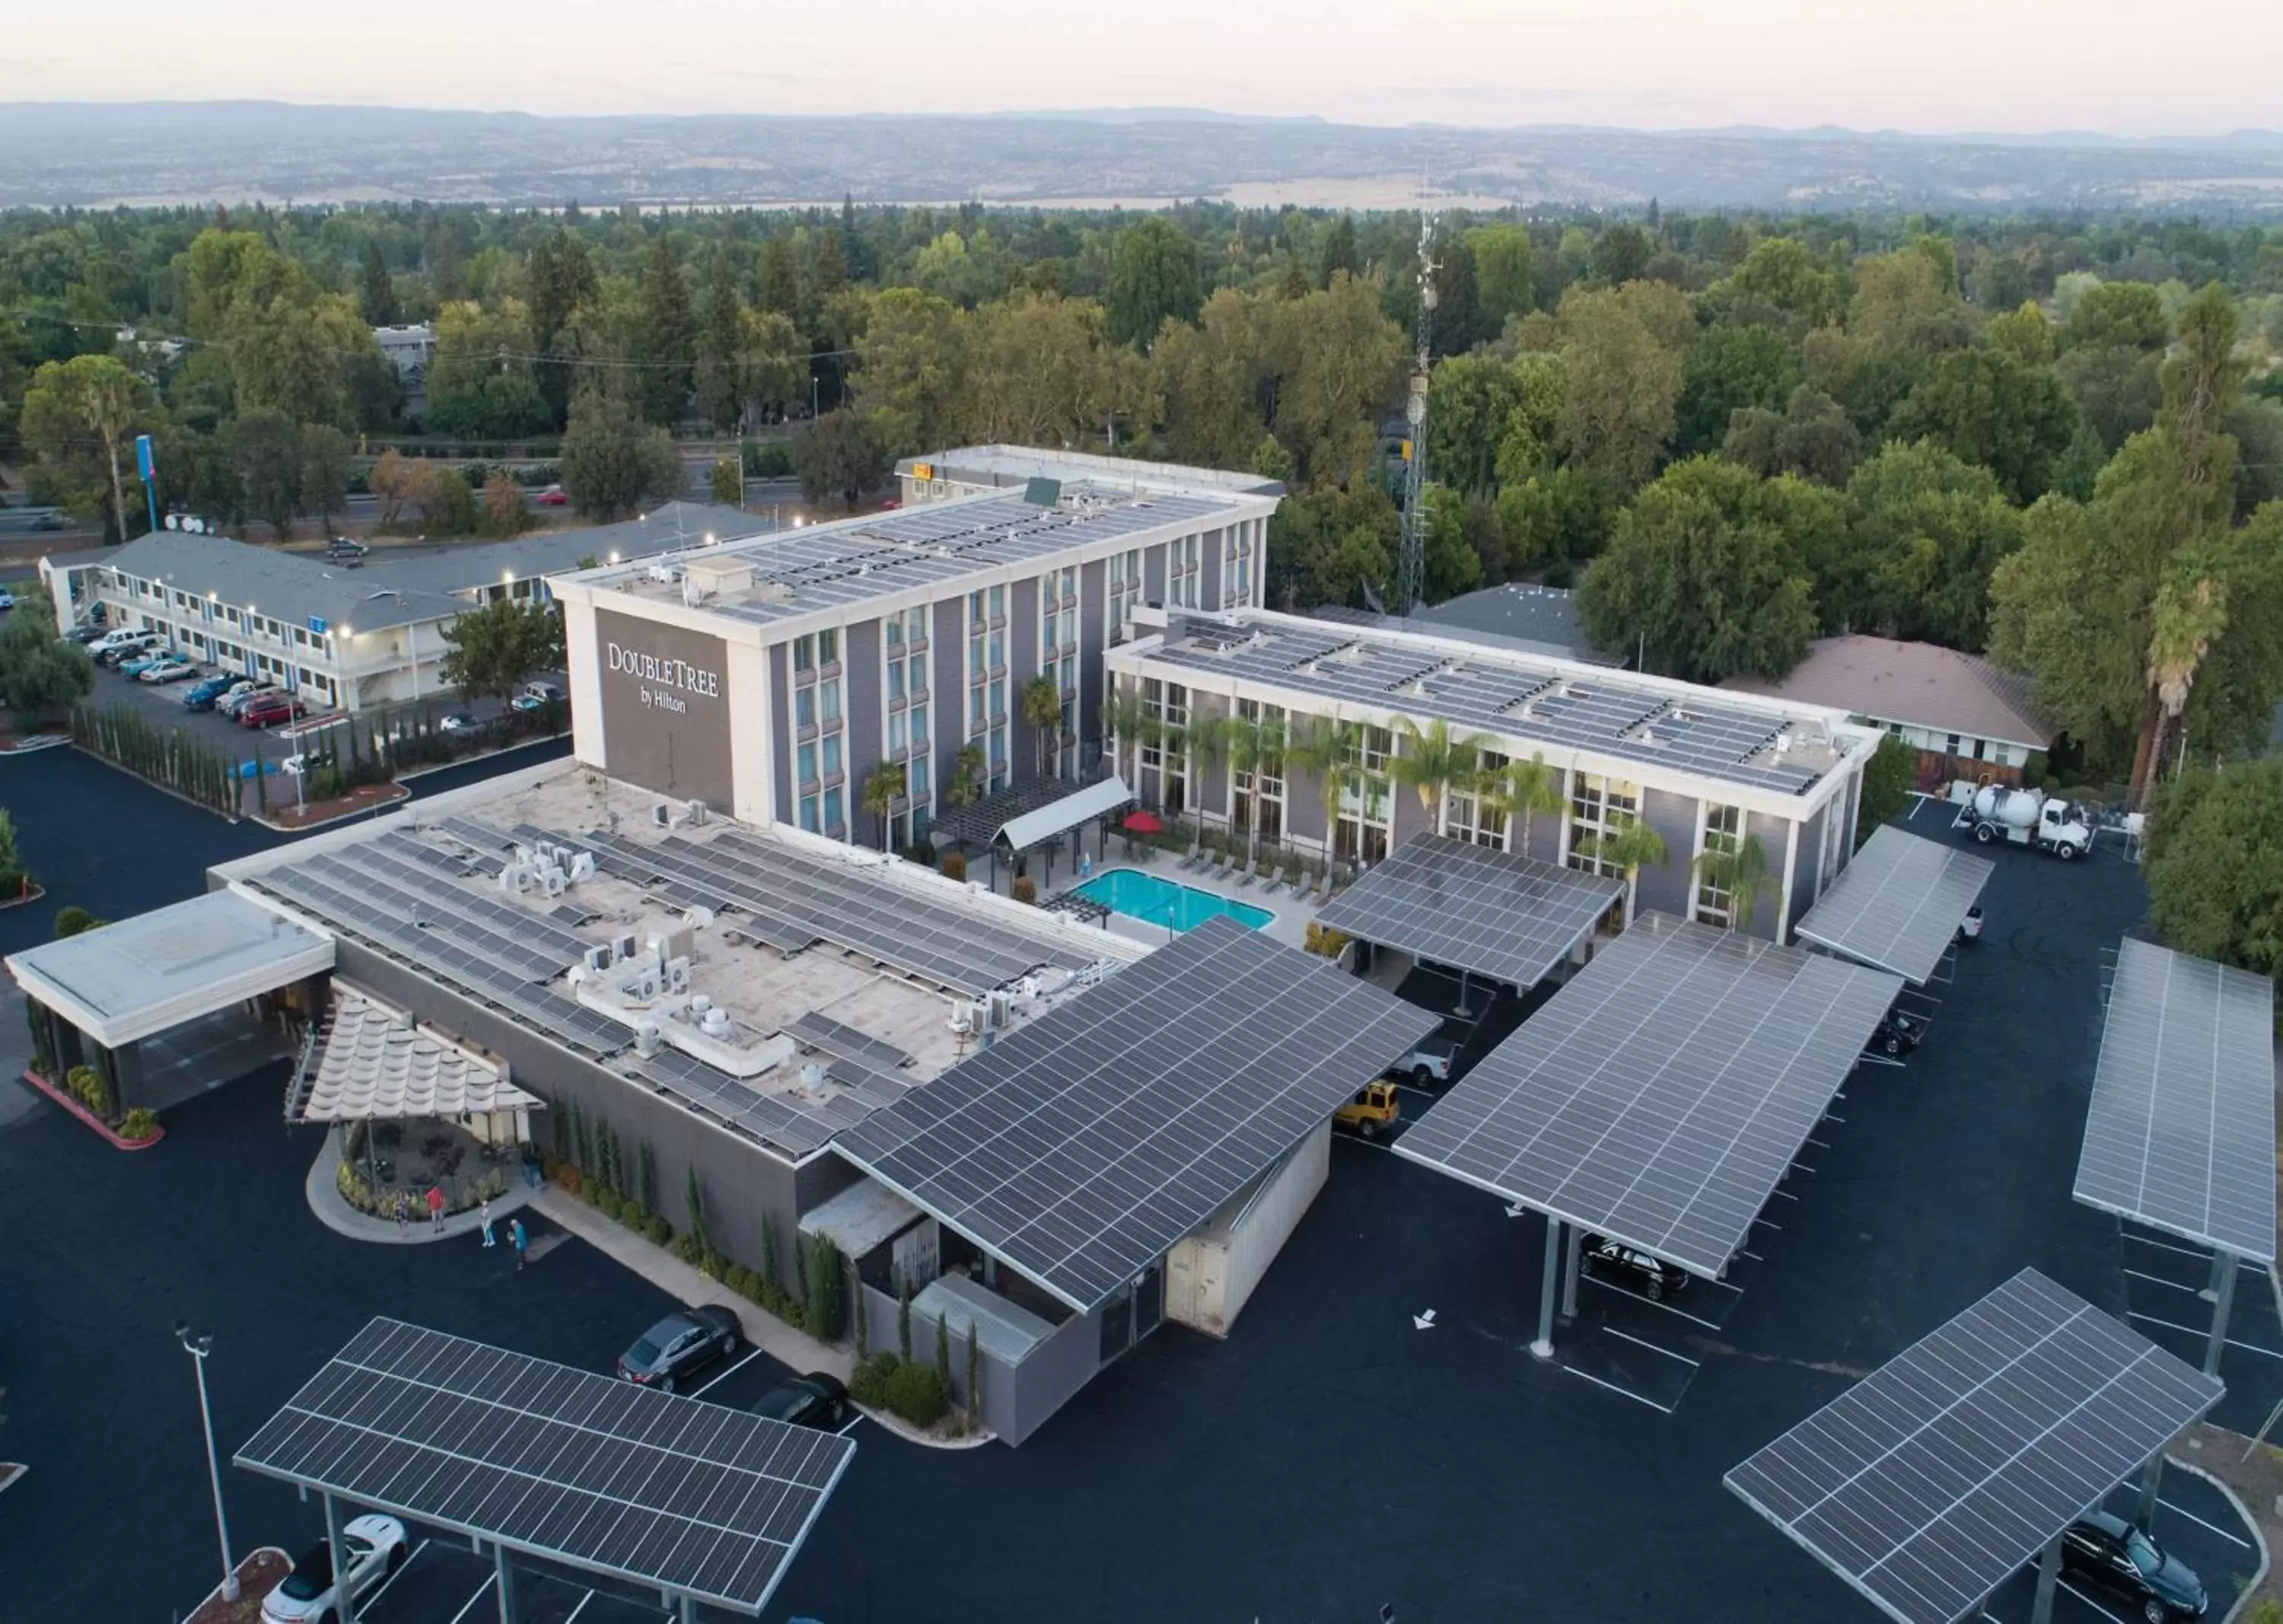 Property building, Bird's-eye View in Doubletree By Hilton Chico, Ca